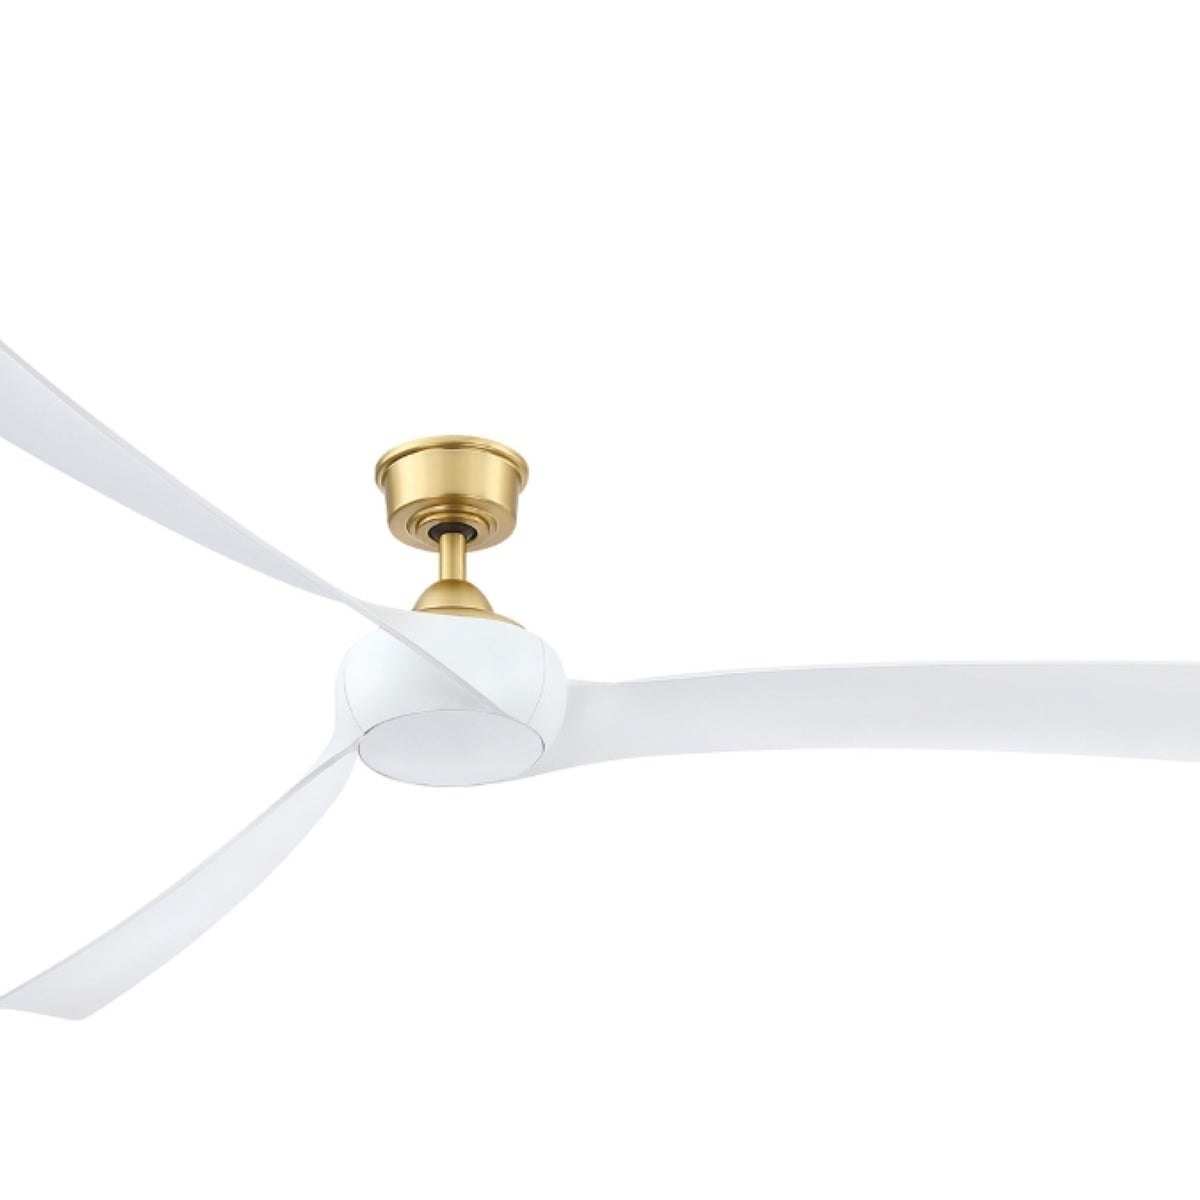 Wrap Custom Indoor/Outdoor Ceiling Fan Motor With Remote, 64-84" Blades Sold Separately - Bees Lighting